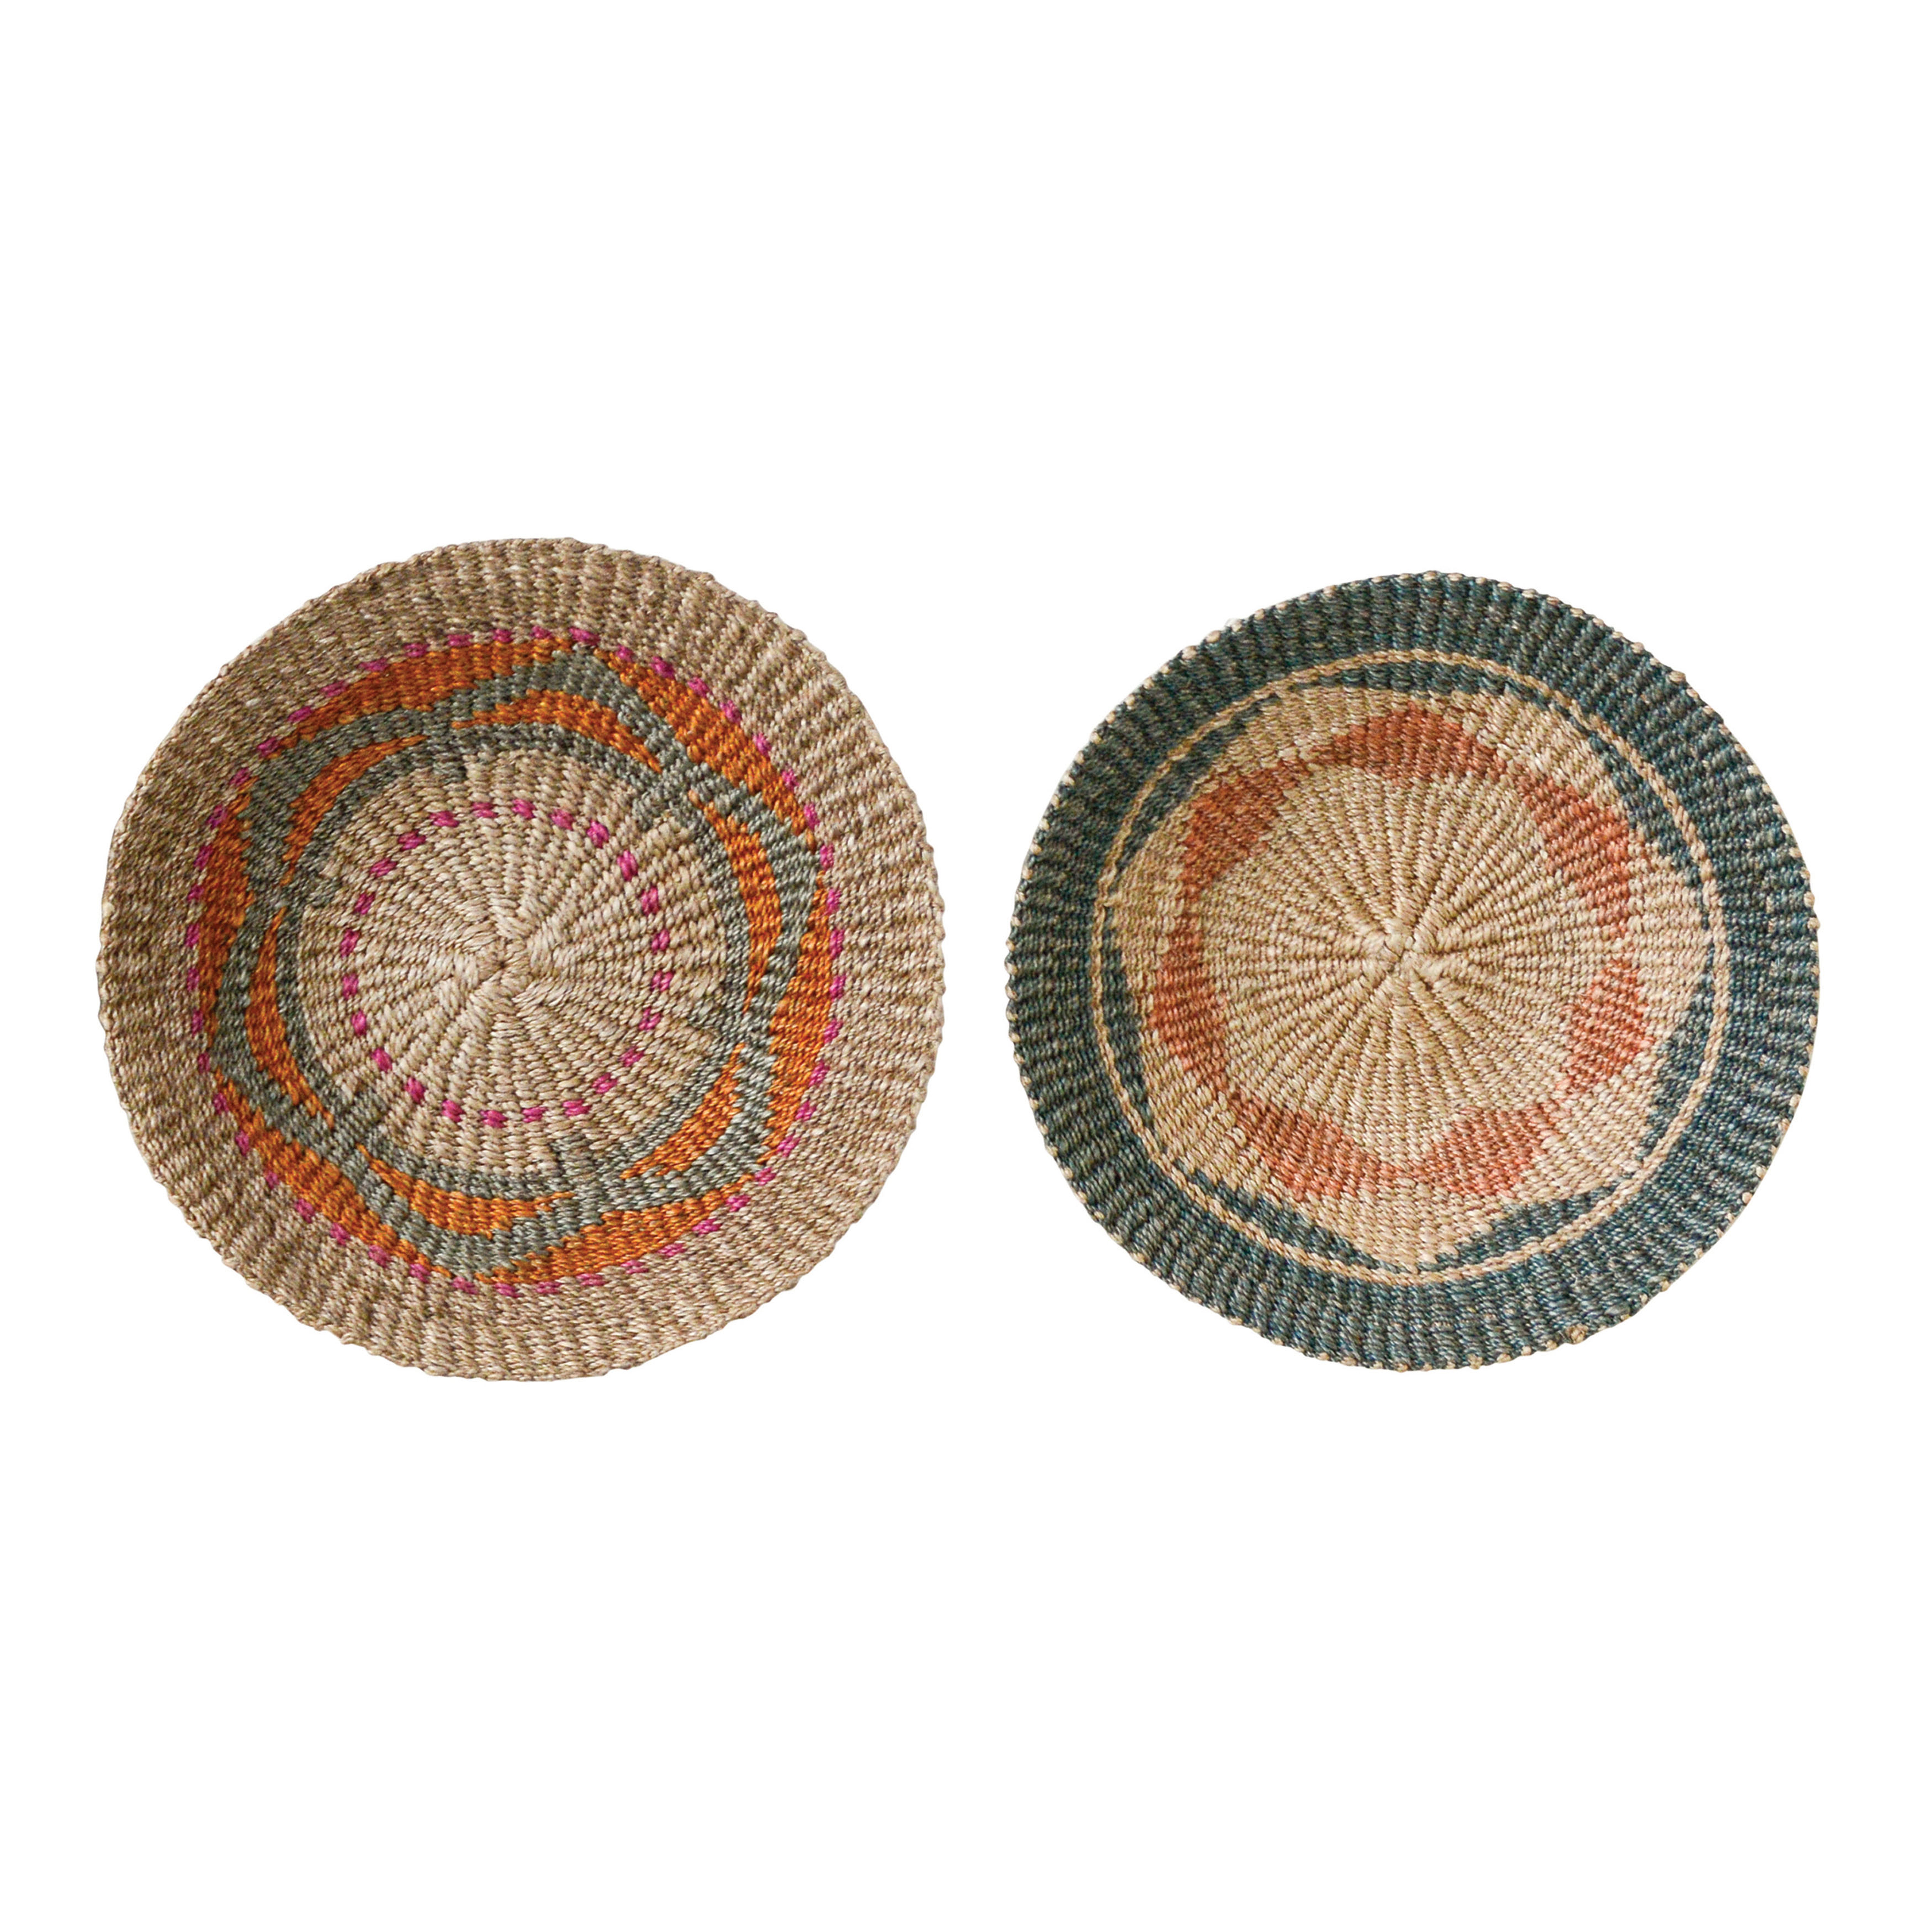 Handwoven Abaca Wall Baskets (Set of 2 Styles) - Nomad Home